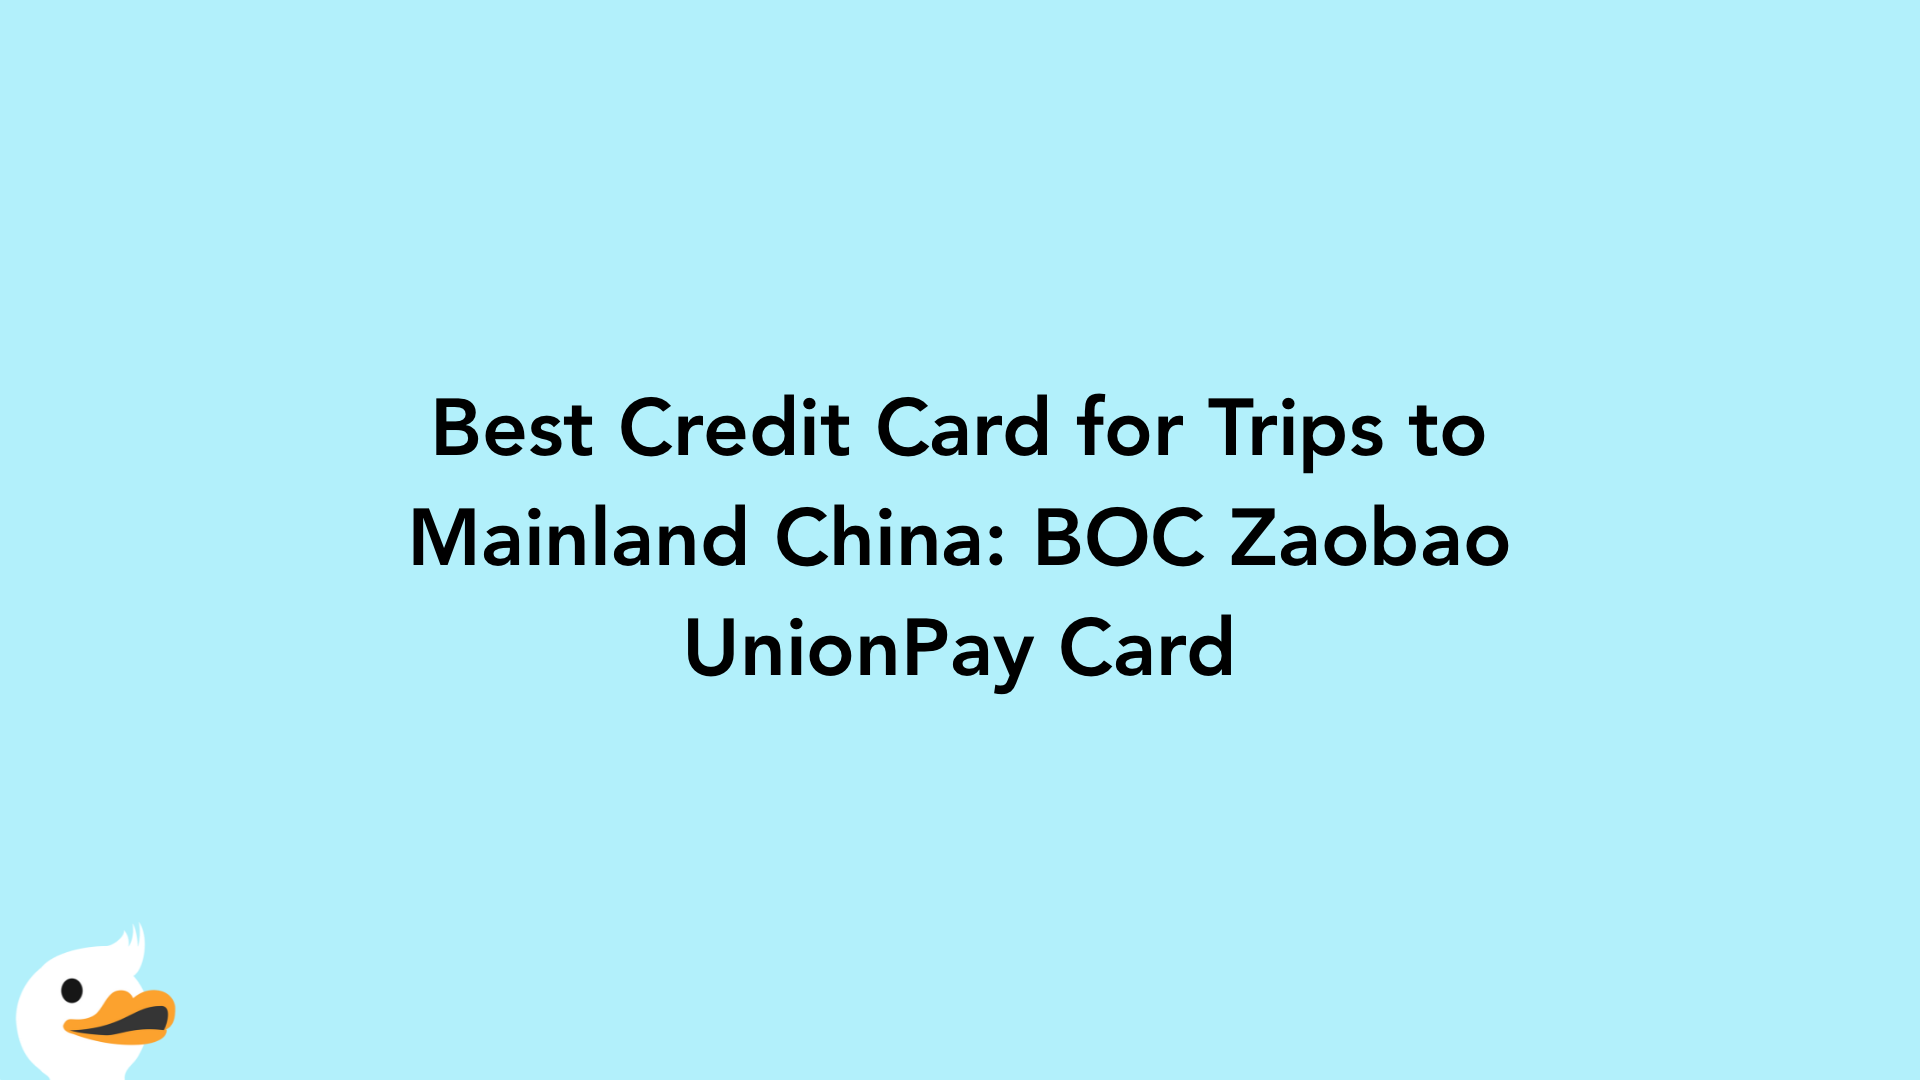 Best Credit Card for Trips to Mainland China: BOC Zaobao UnionPay Card